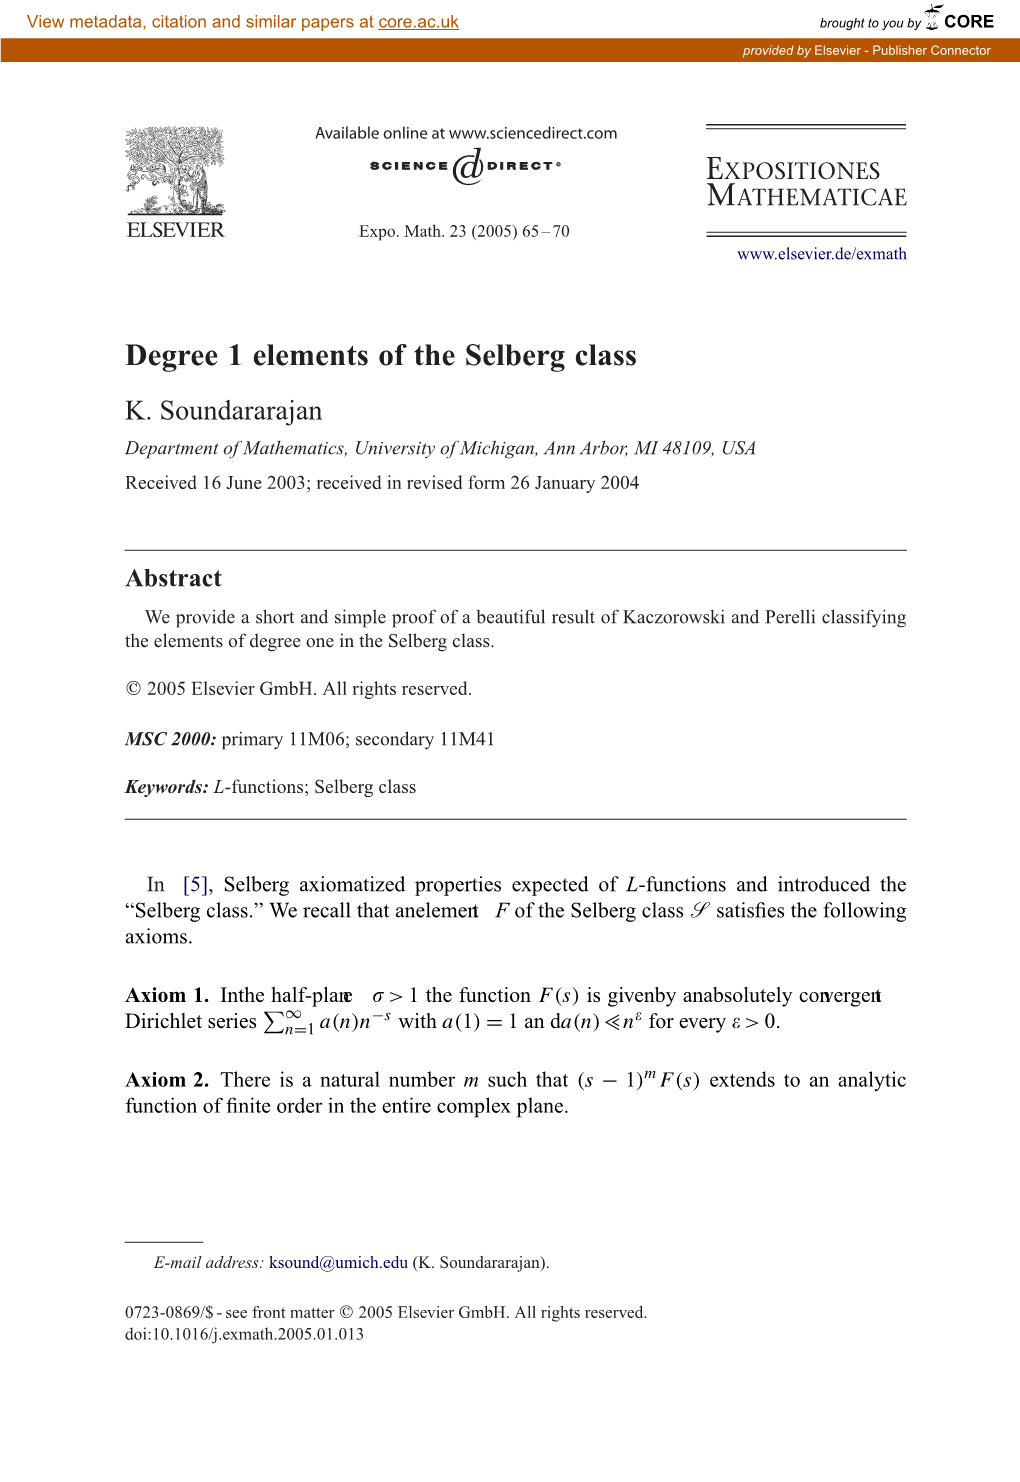 Degree 1 Elements of the Selberg Class K